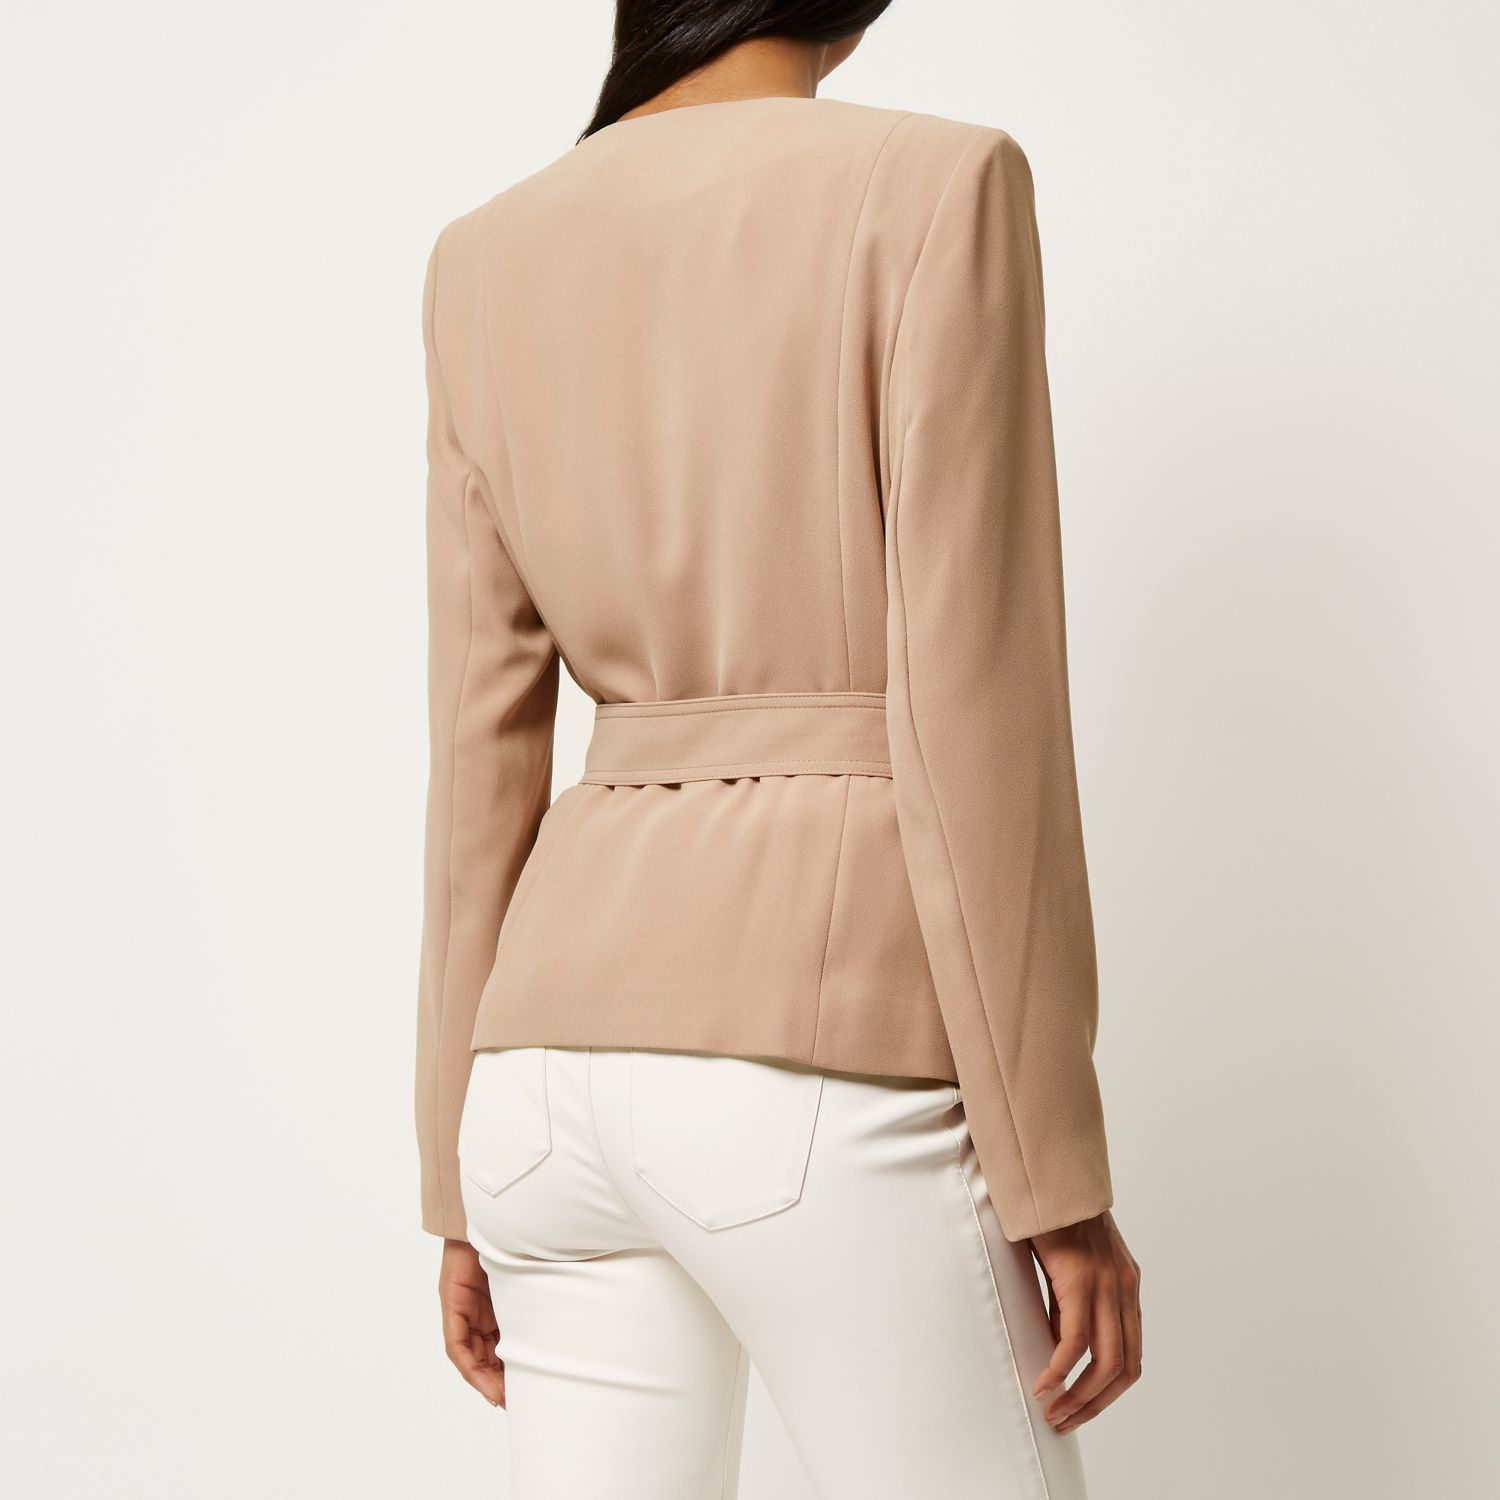 River Island Synthetic Dark Beige Belted Jacket in Natural - Lyst